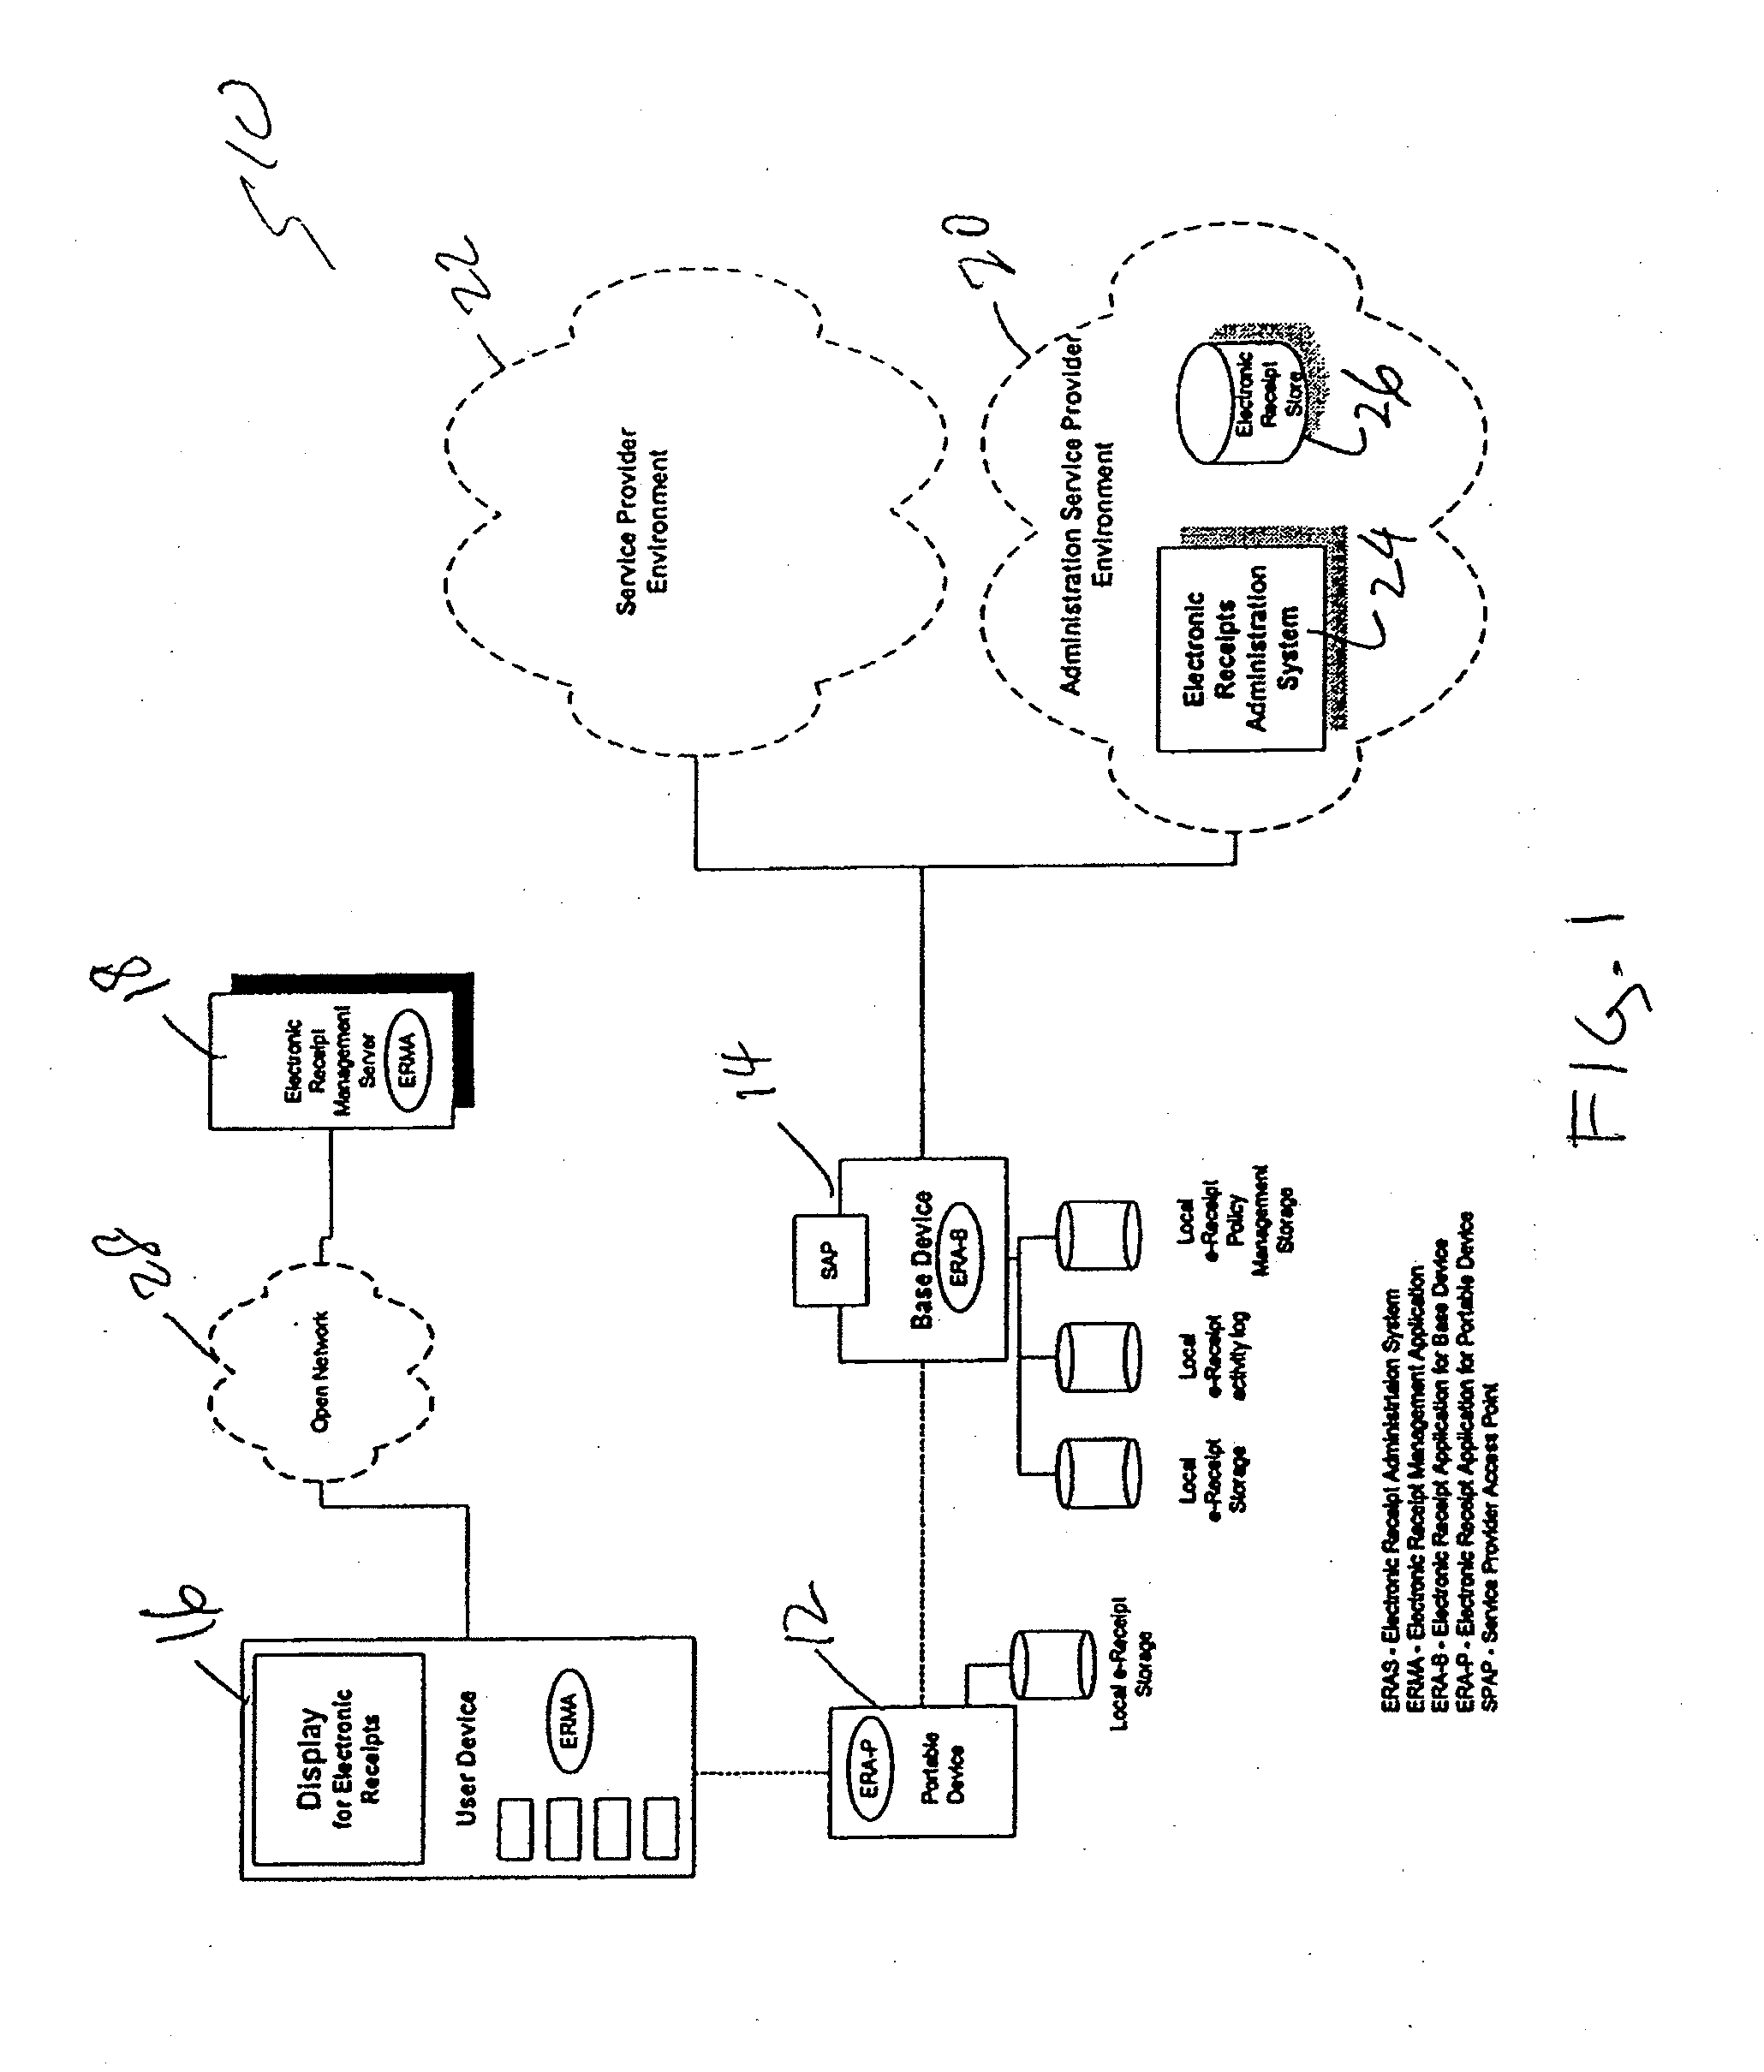 Method and User Device for Management of Electronic Receipts